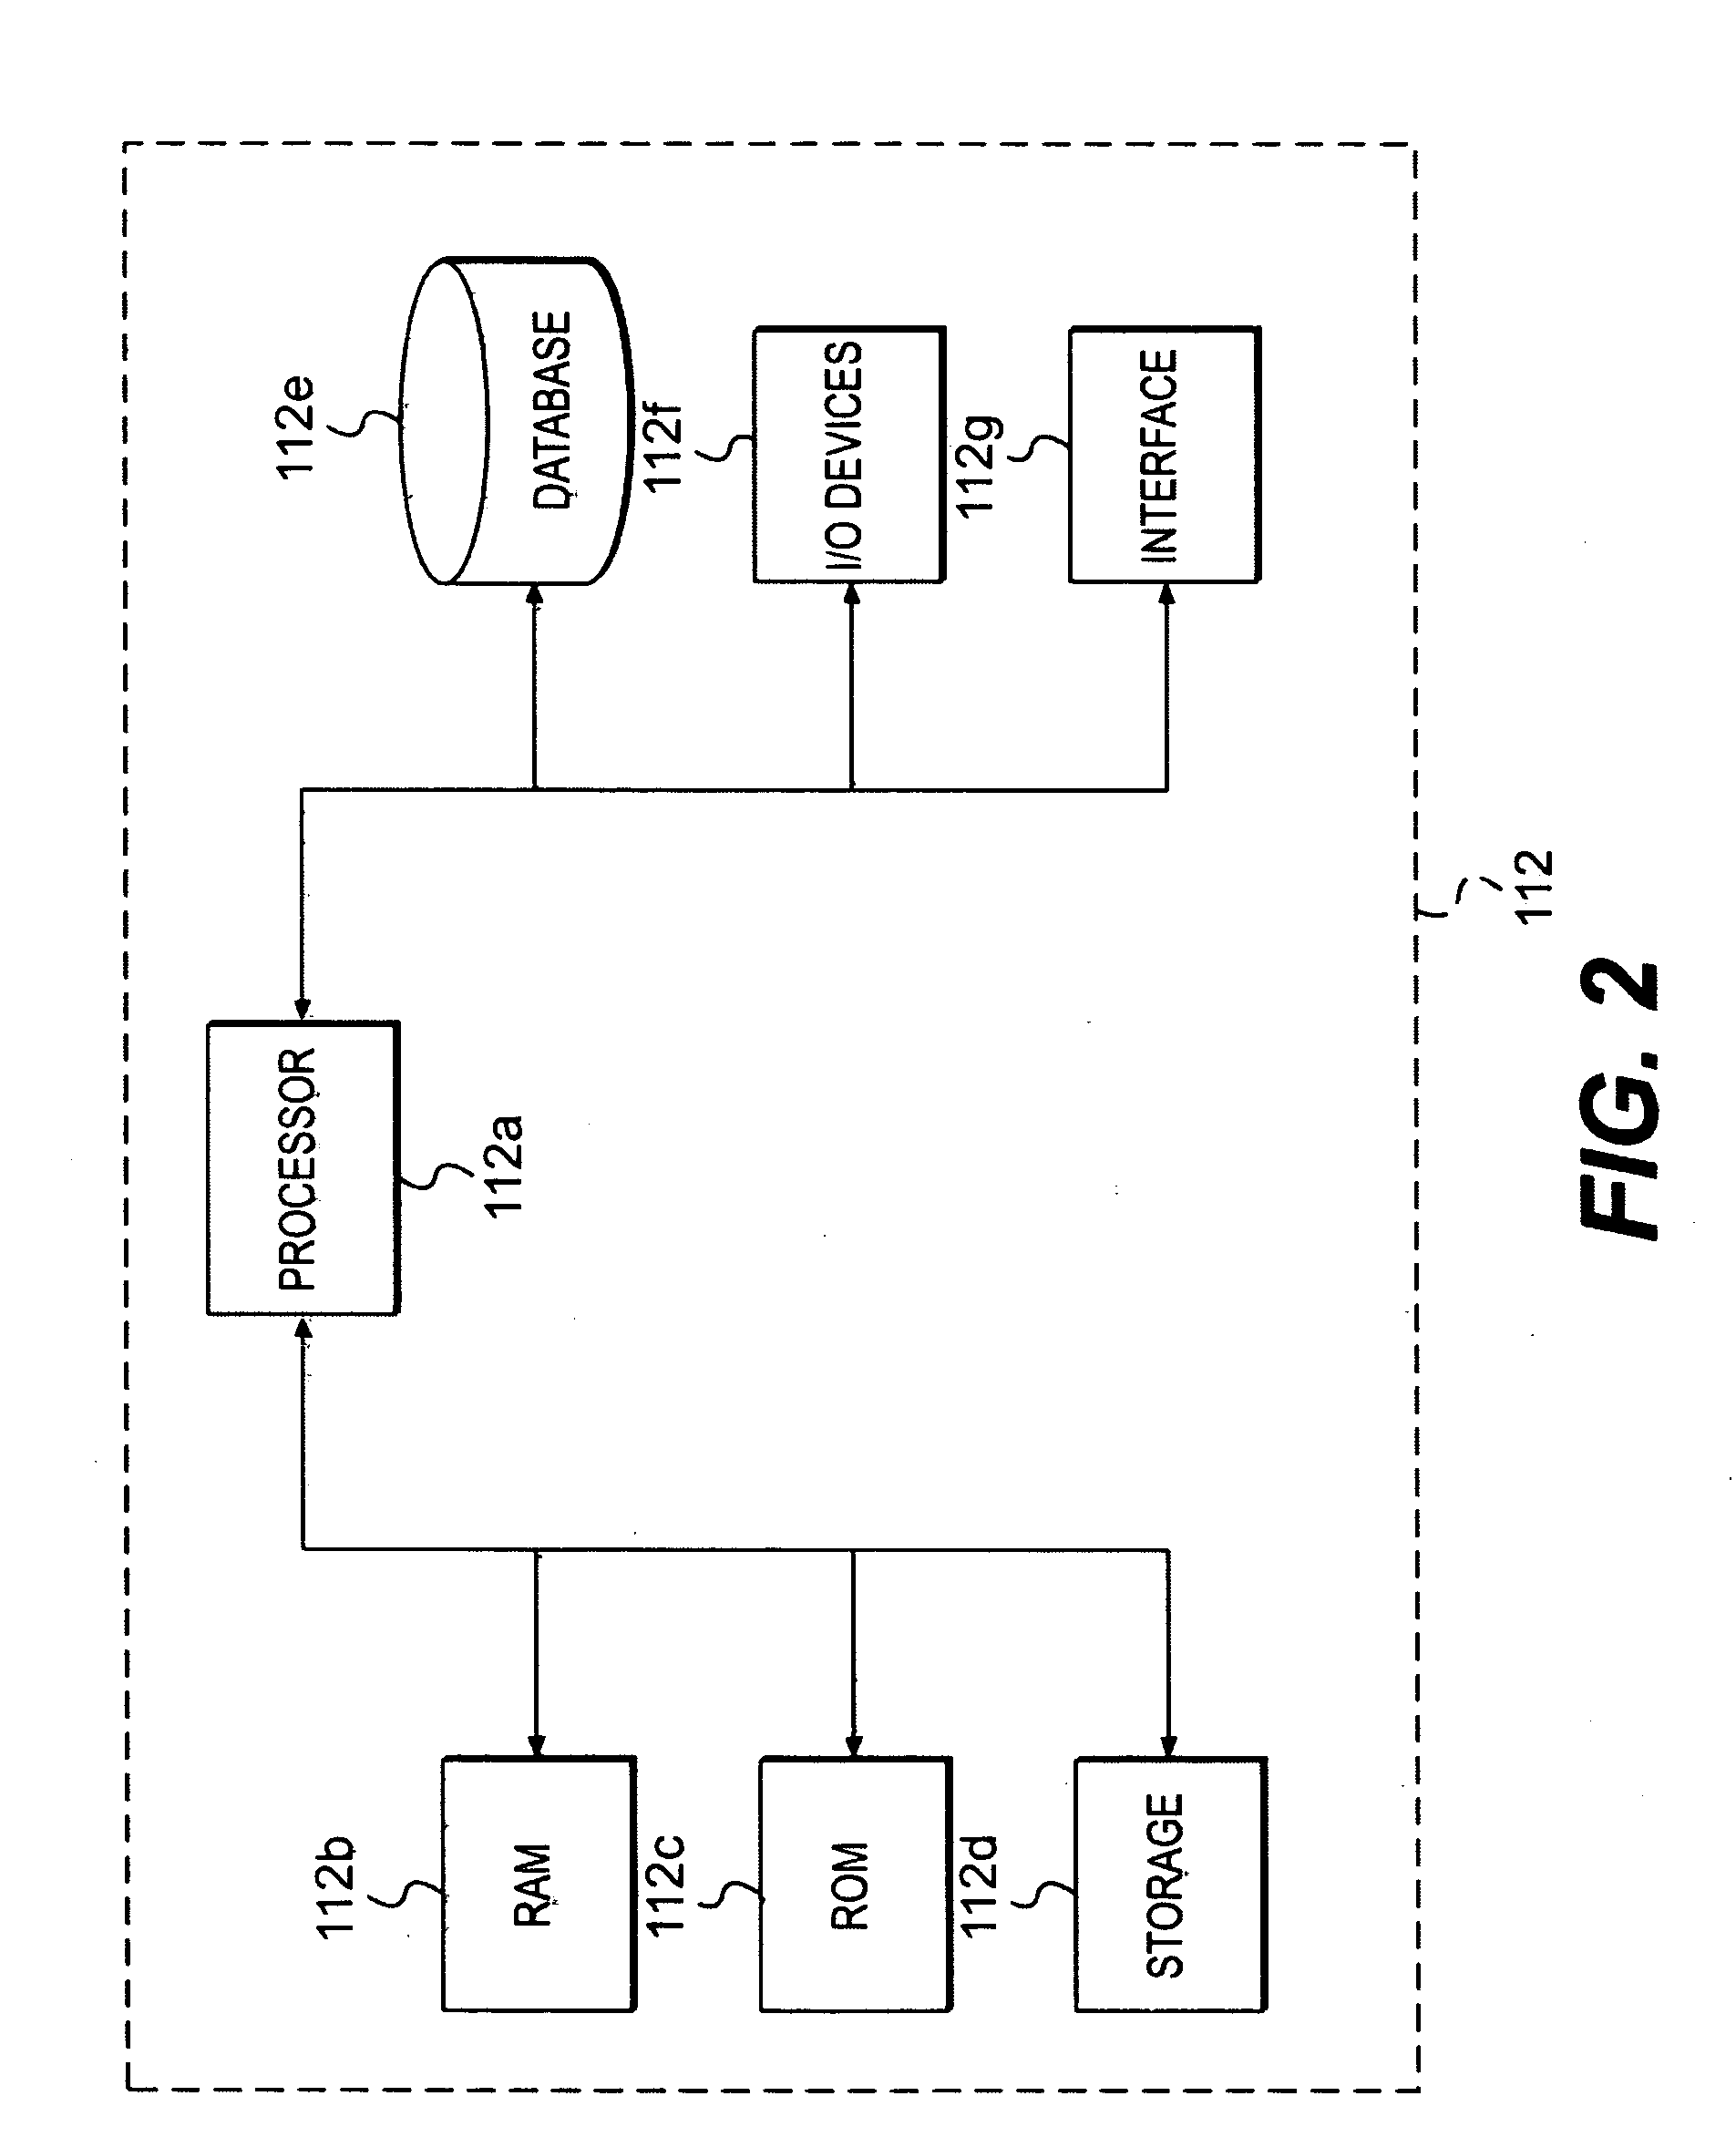 Method and system for selective, event-based communications